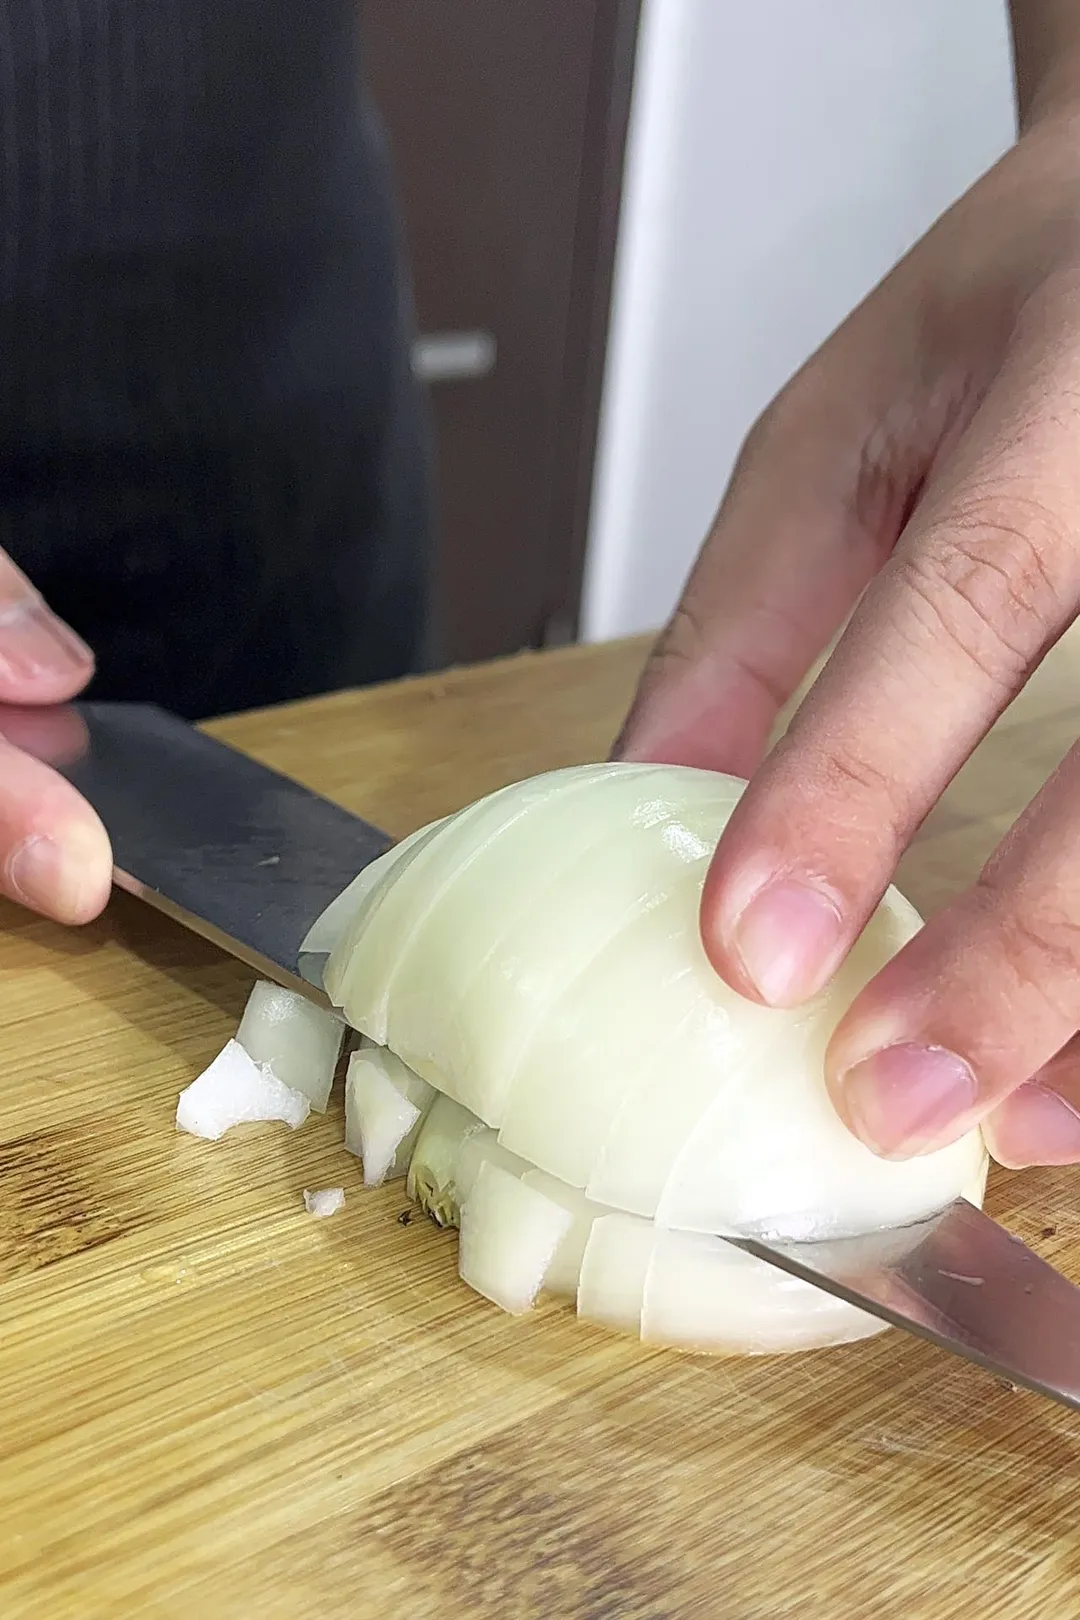 One hand holds half an onion, the other uses a knife to cut it